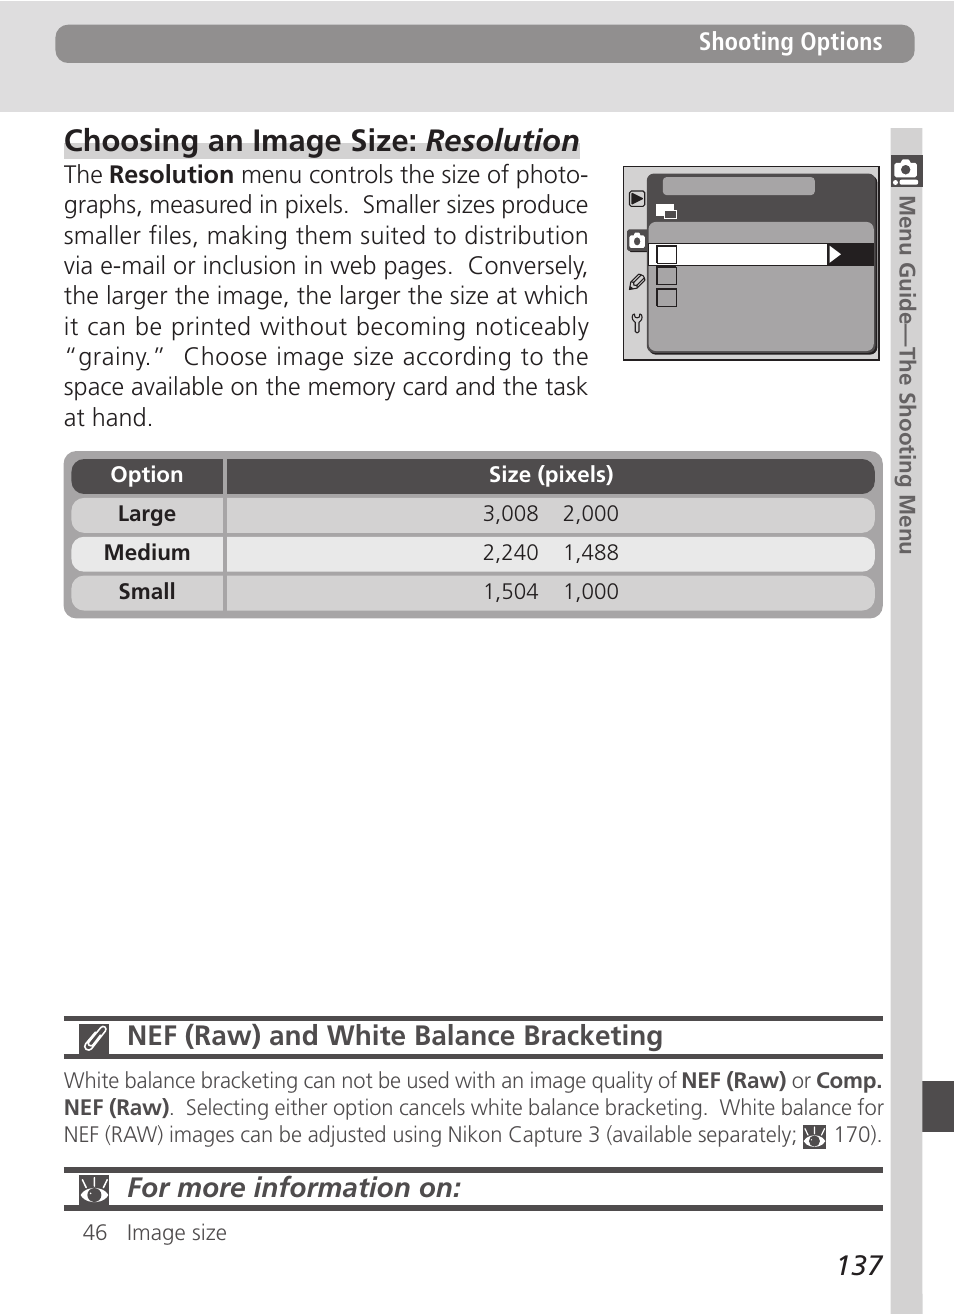 Choosing an image size: resolution, Nef (raw) and white balance bracketing, For more information on | Nikon D100 User Manual | Page 149 / 212